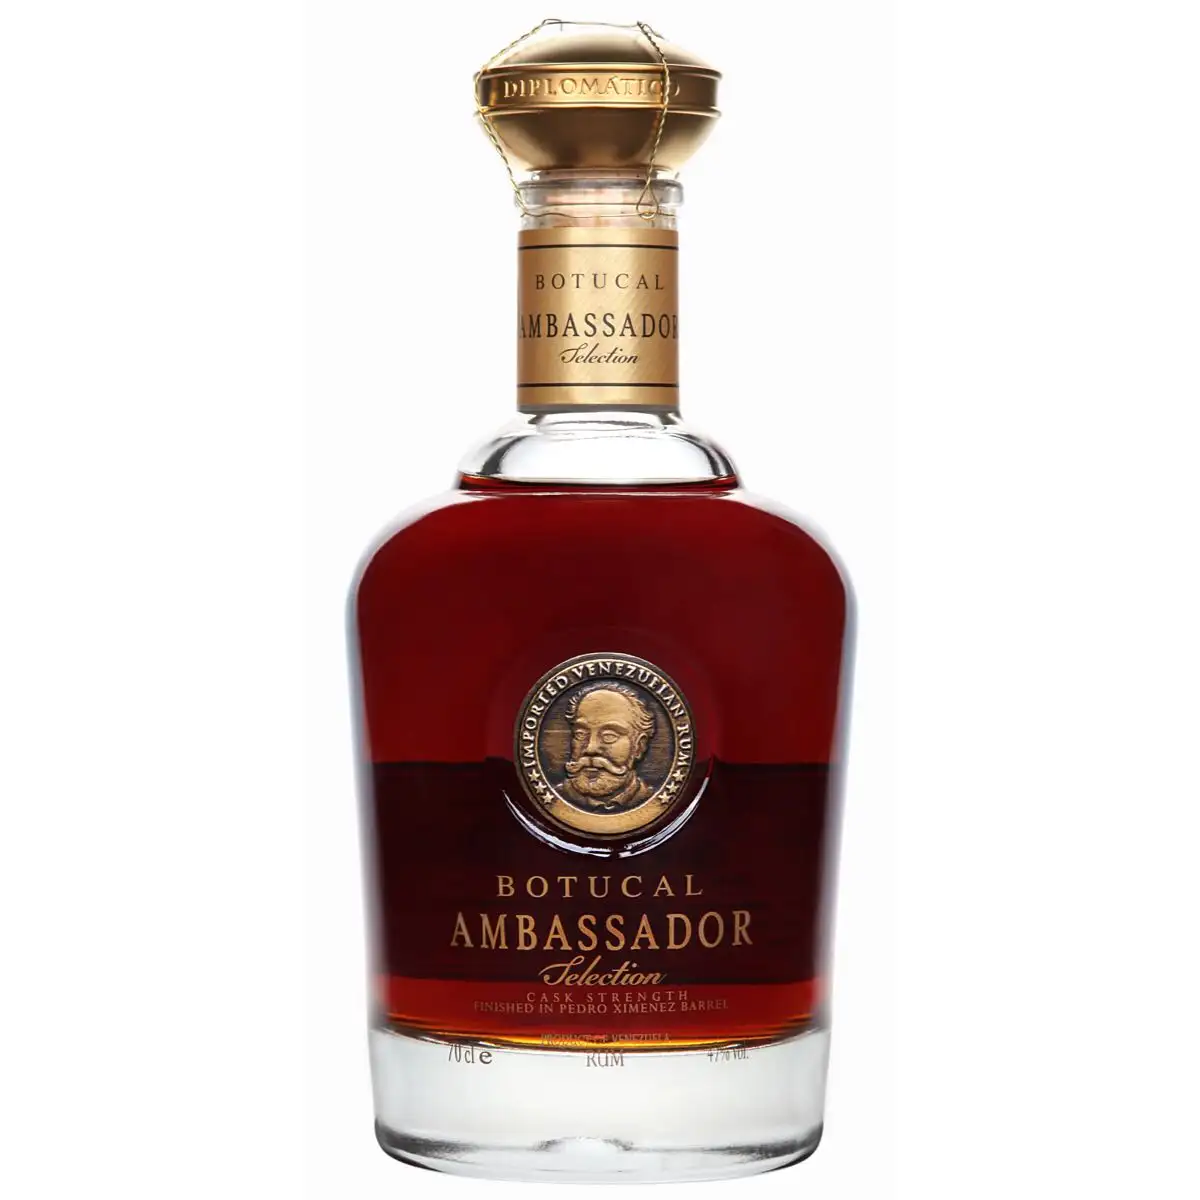 Image of the front of the bottle of the rum Diplomático / Botucal Ambassador Selection